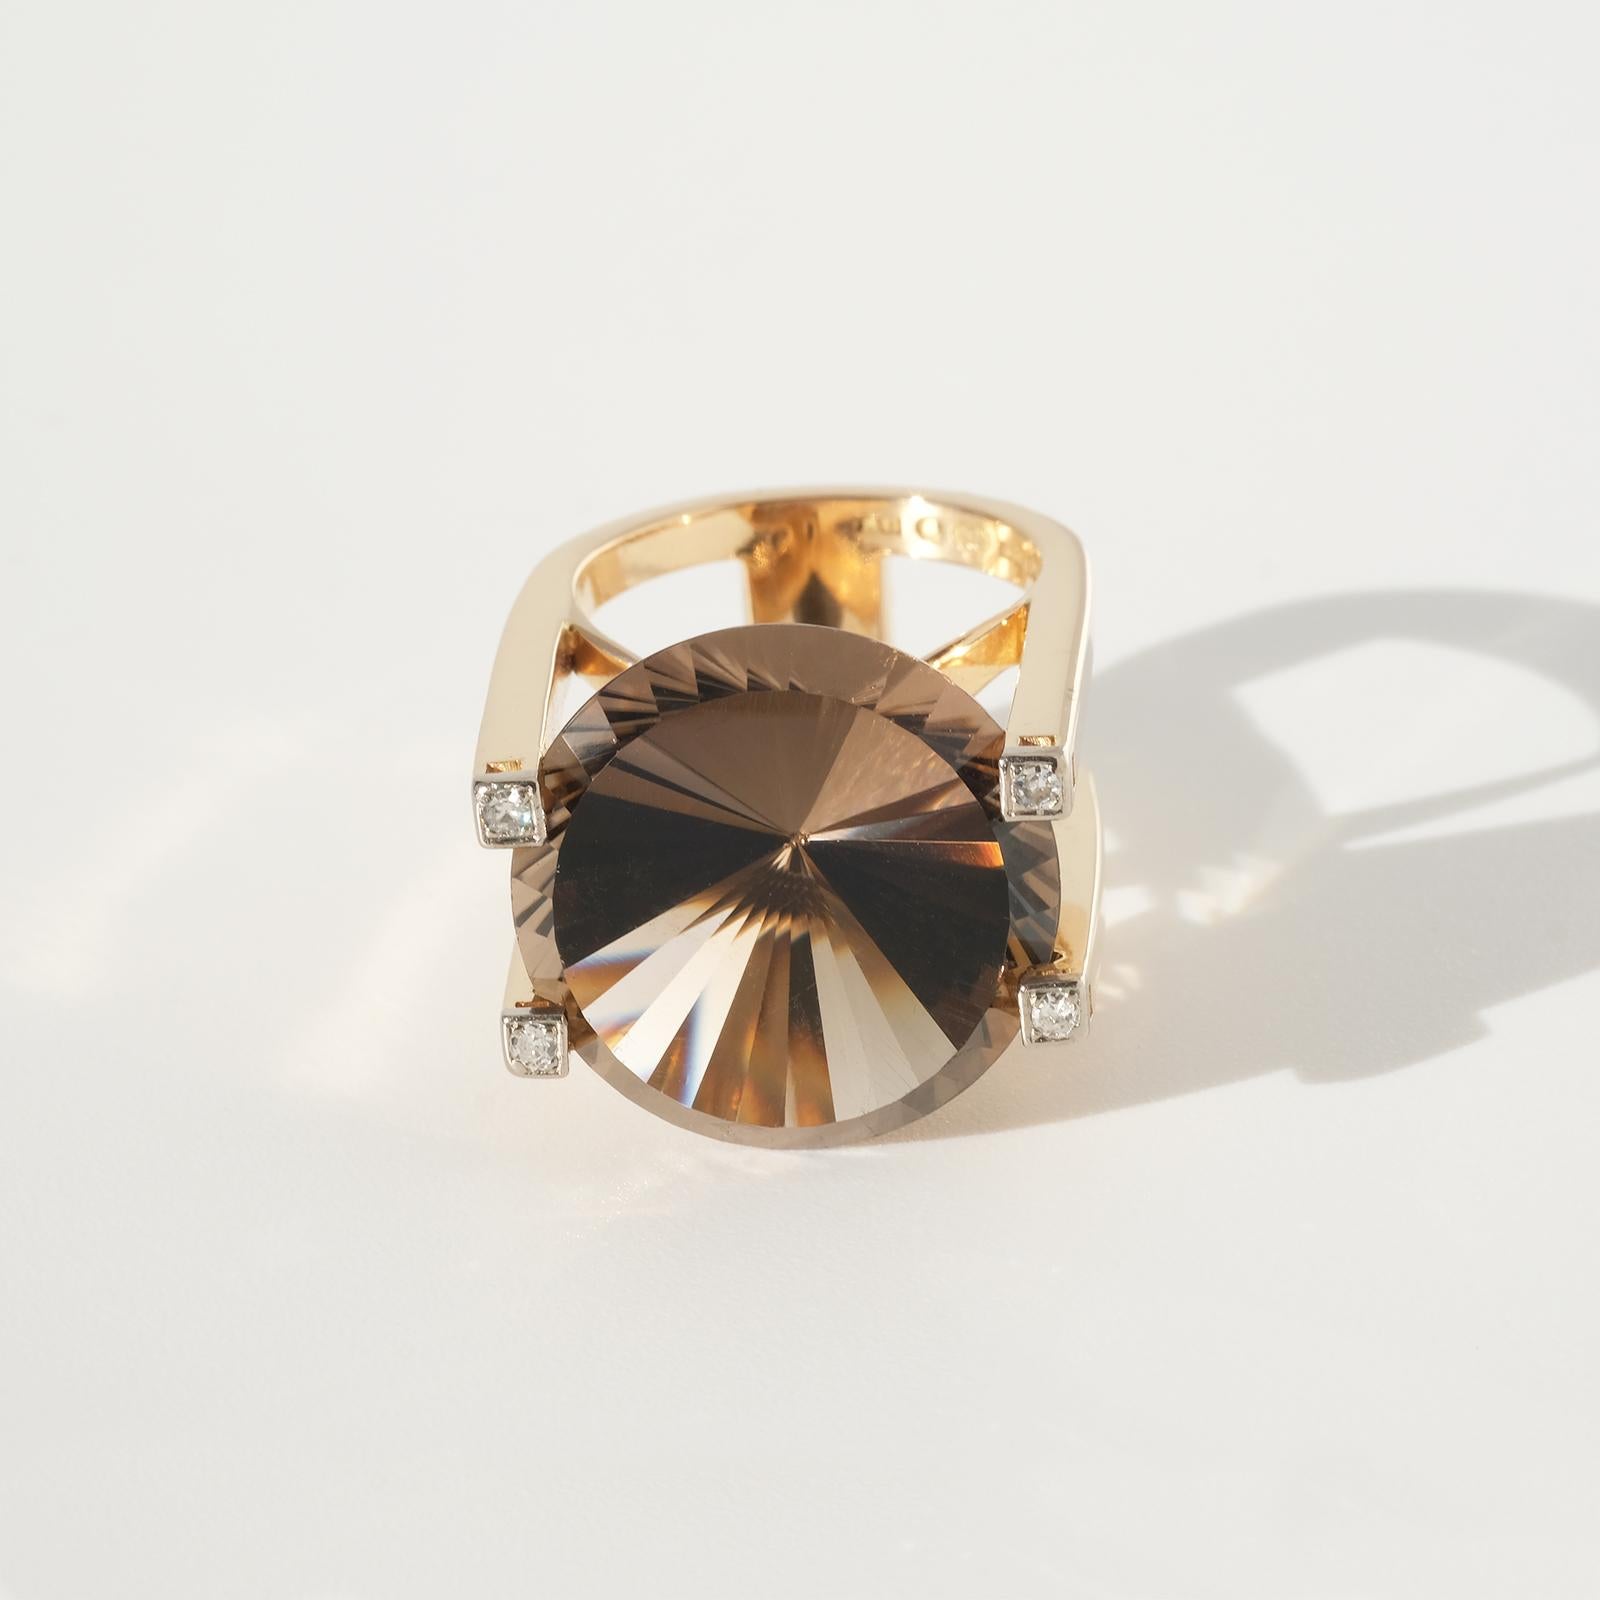 This luxurious 18 karat gold, smokey quarts and diamond ring has an exquisite design with its high shaped setting and its big brilliant cut smoky quartz. The final touch is the four octagon cut diamonds.

This ring is perfect for the cocktail